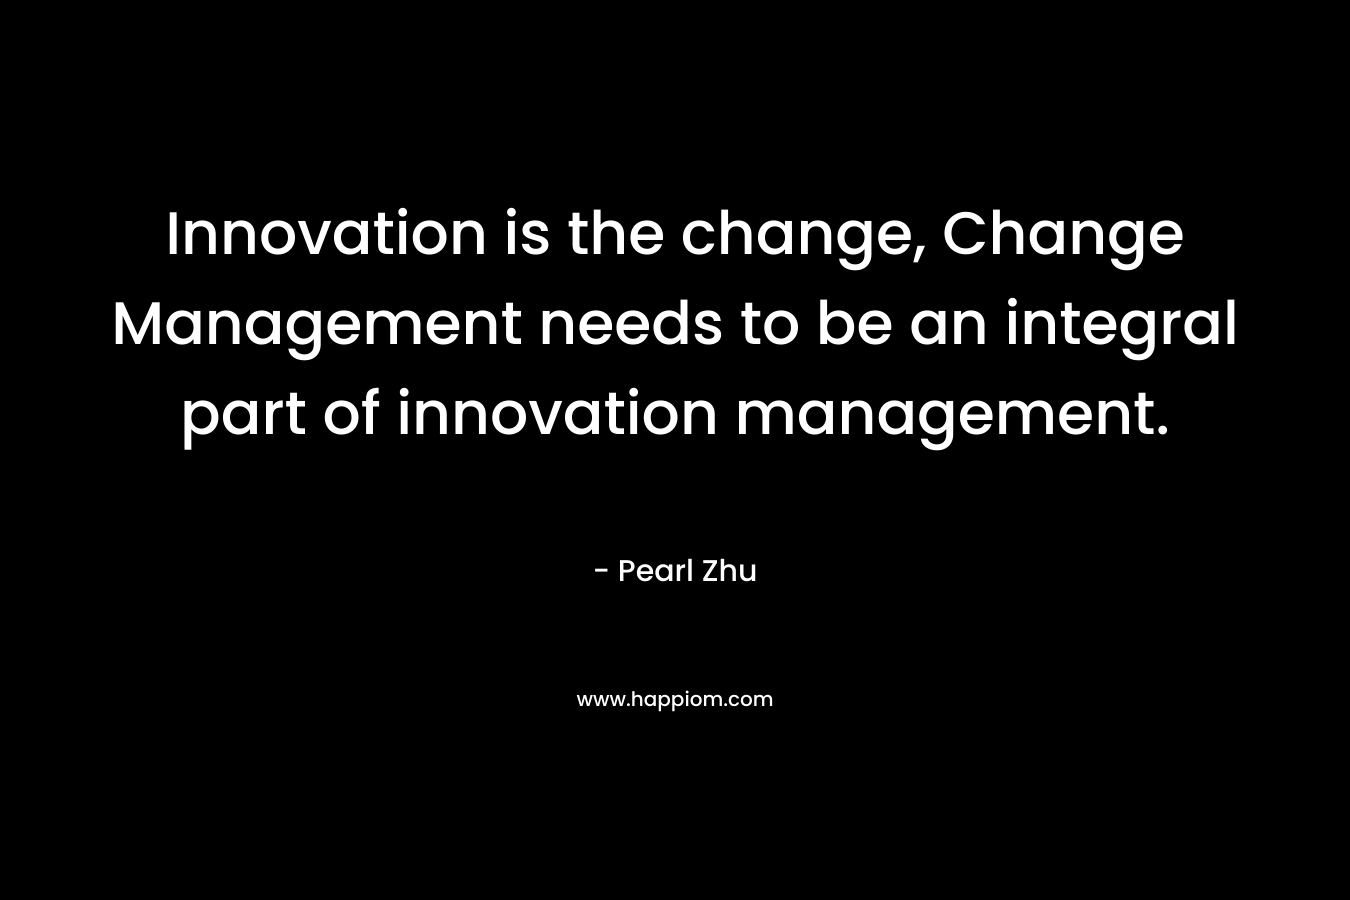 Innovation is the change, Change Management needs to be an integral part of innovation management.